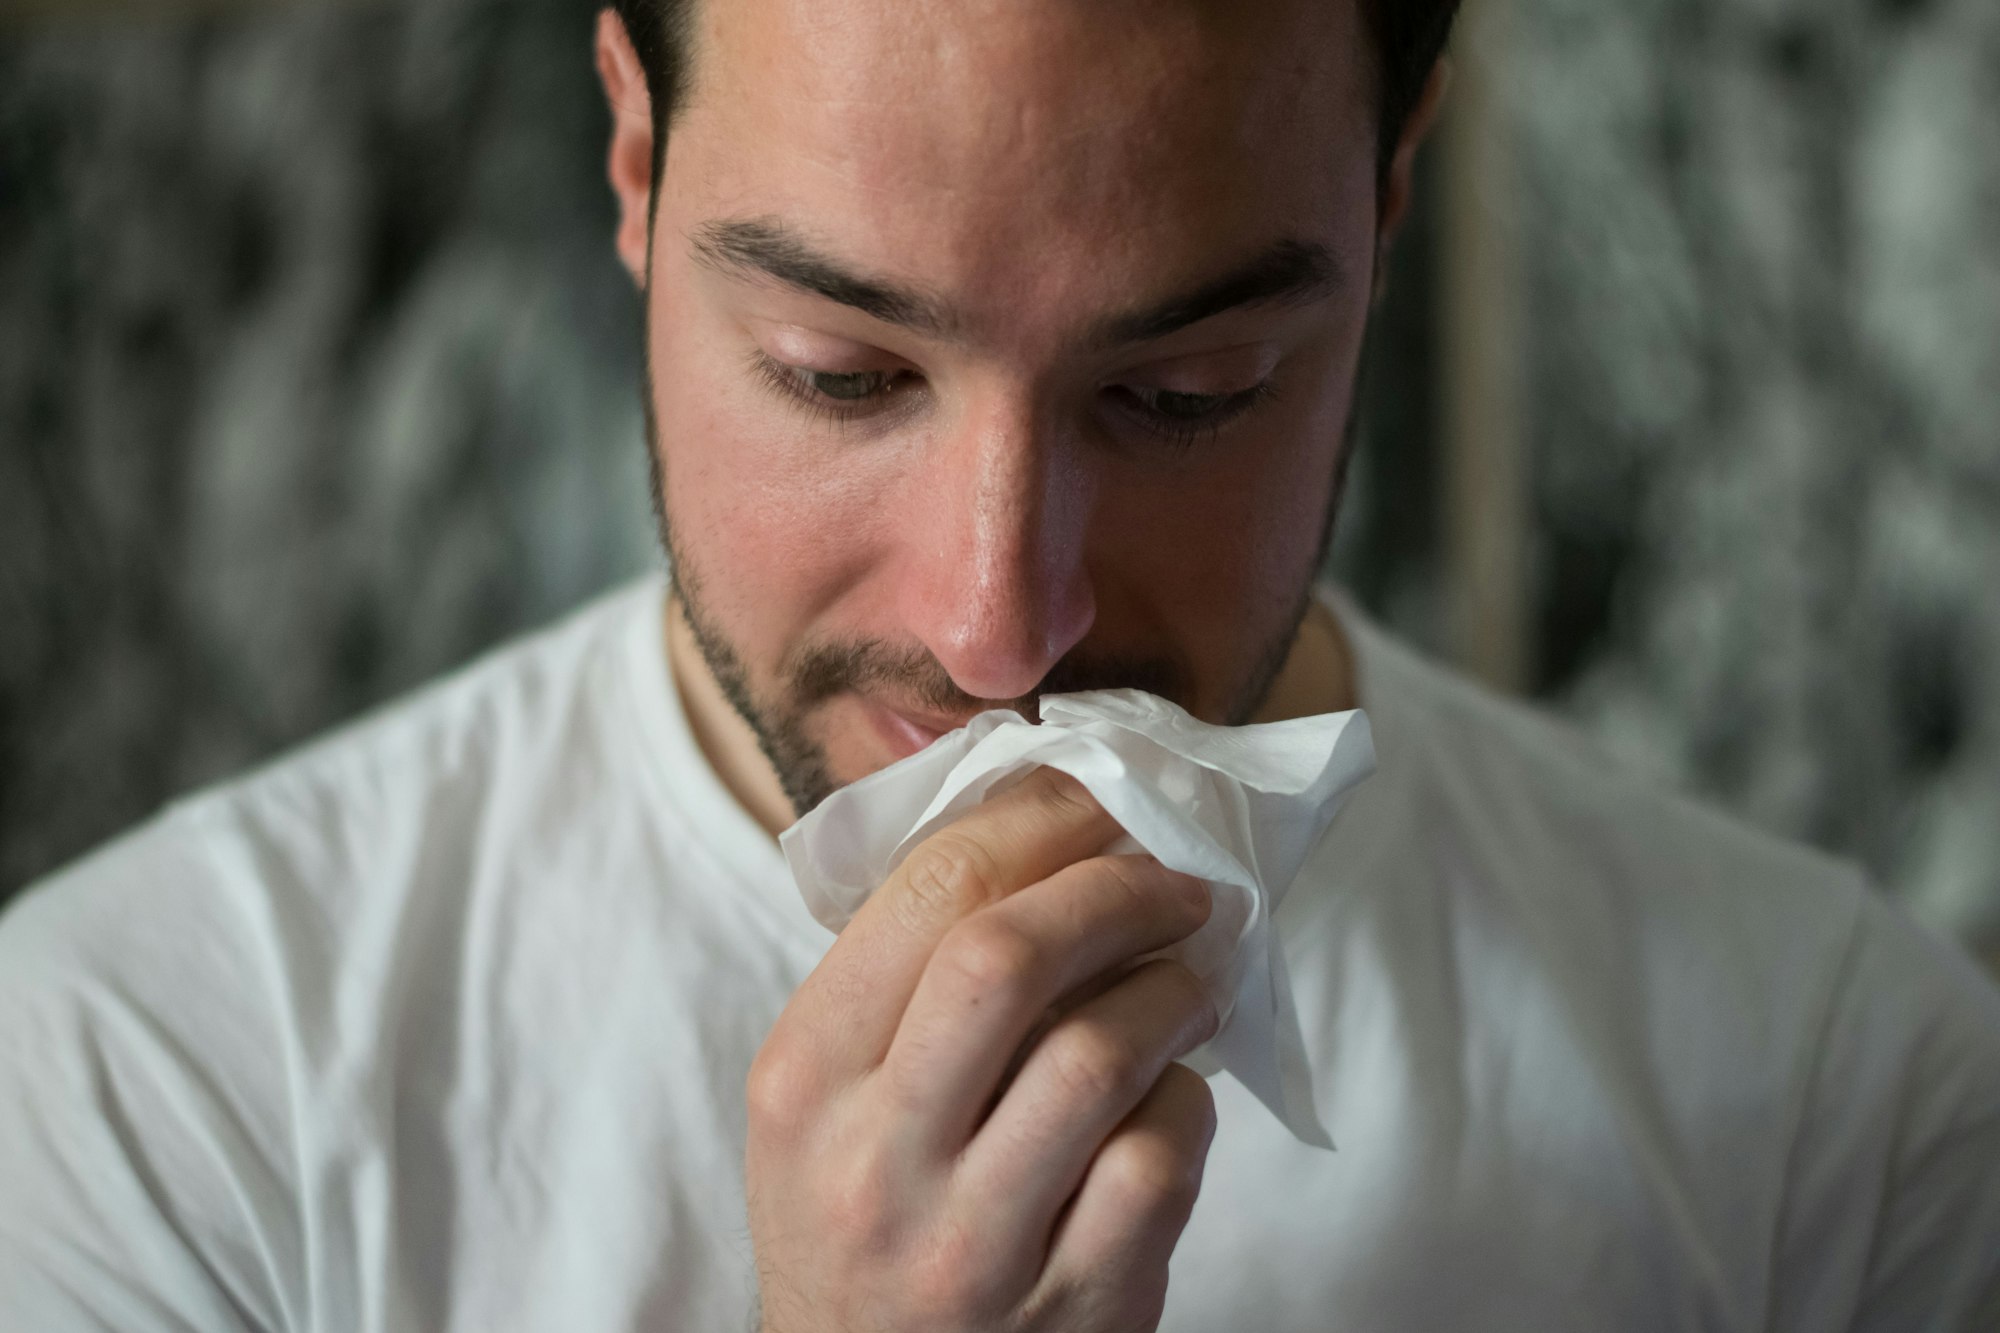 Don't be confused. Learn how to identify and avoid the common cold